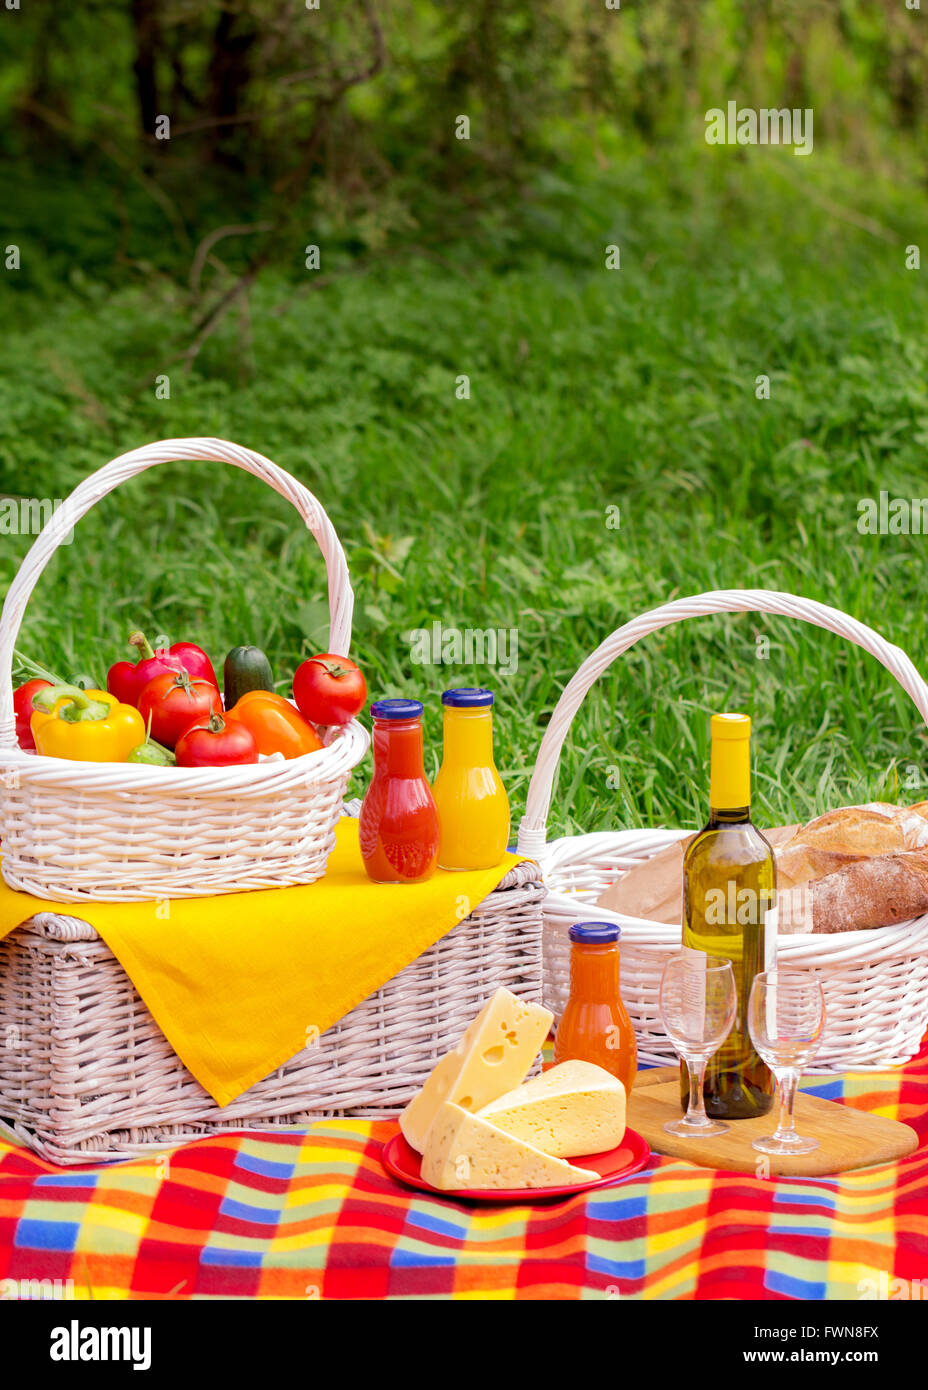 Picnic on the grass. Picnic basket with vegetables and bread. A bottle of wine with glasses and bottles of juice. Stock Photo